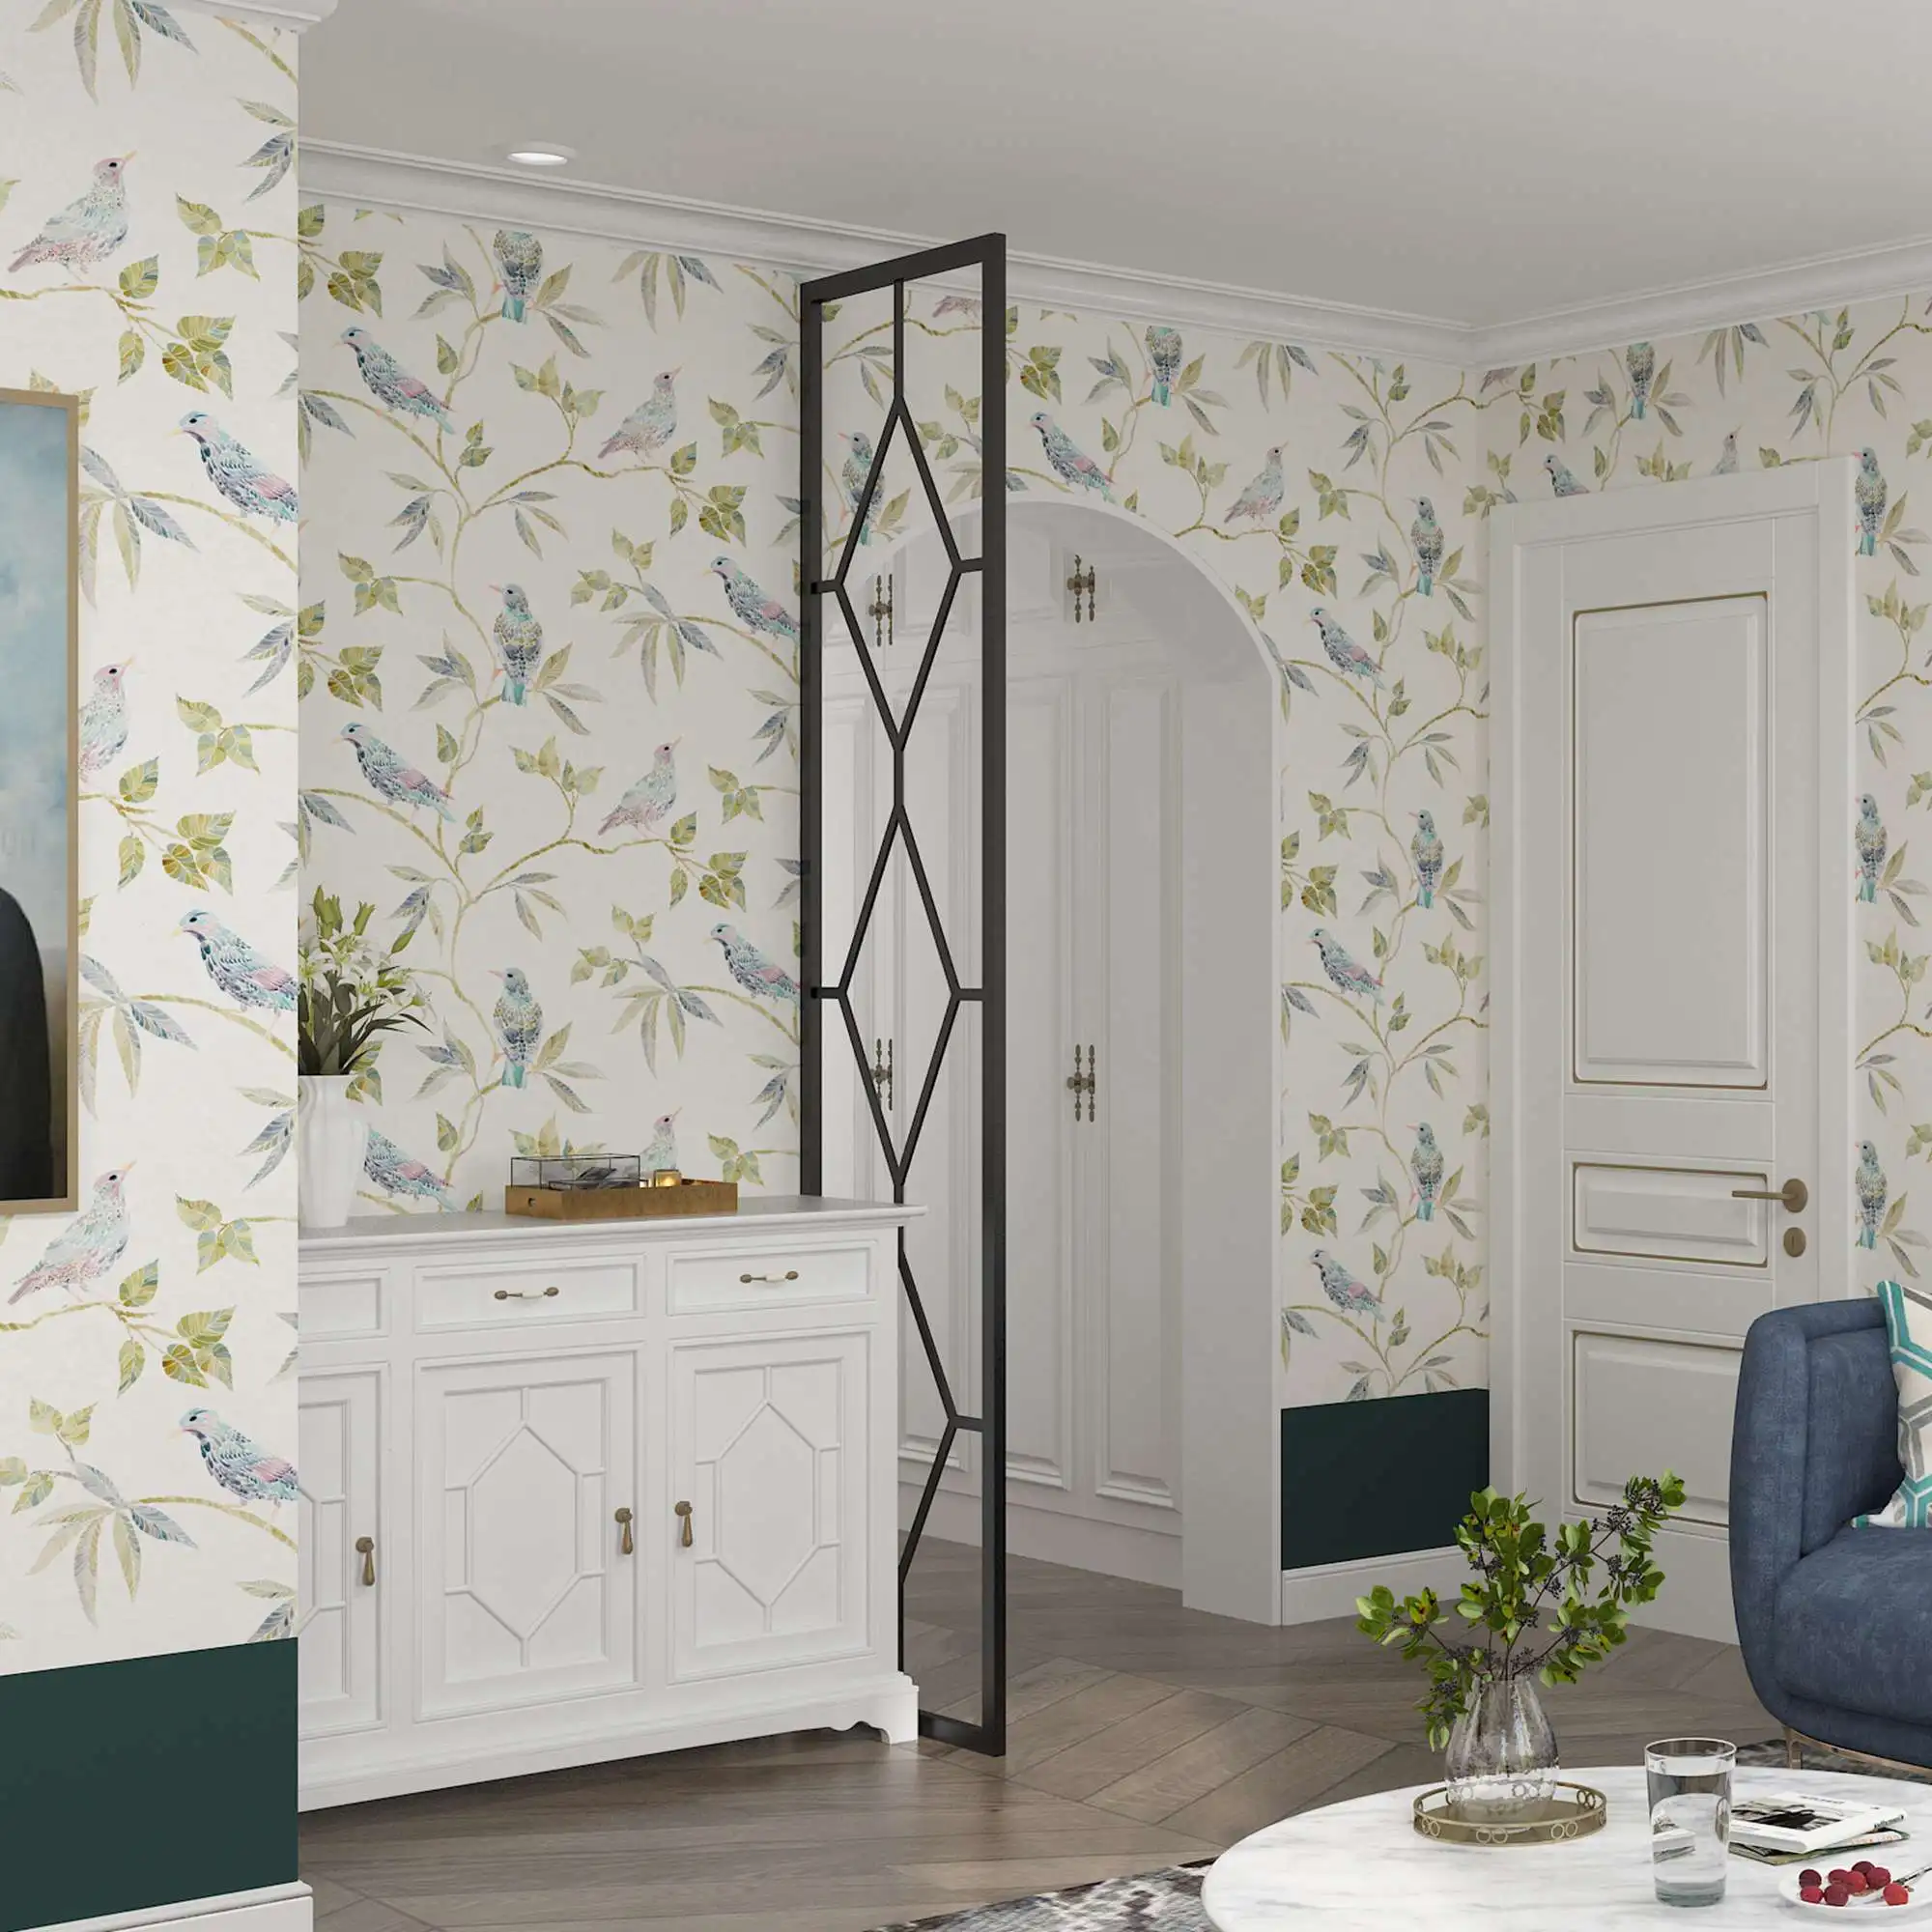 CHINOISE EXOTIQUE Oriental Nature Floral wallpaper with Bird Tree Branch Botanical Wallpaper, Country and warm style C9900801